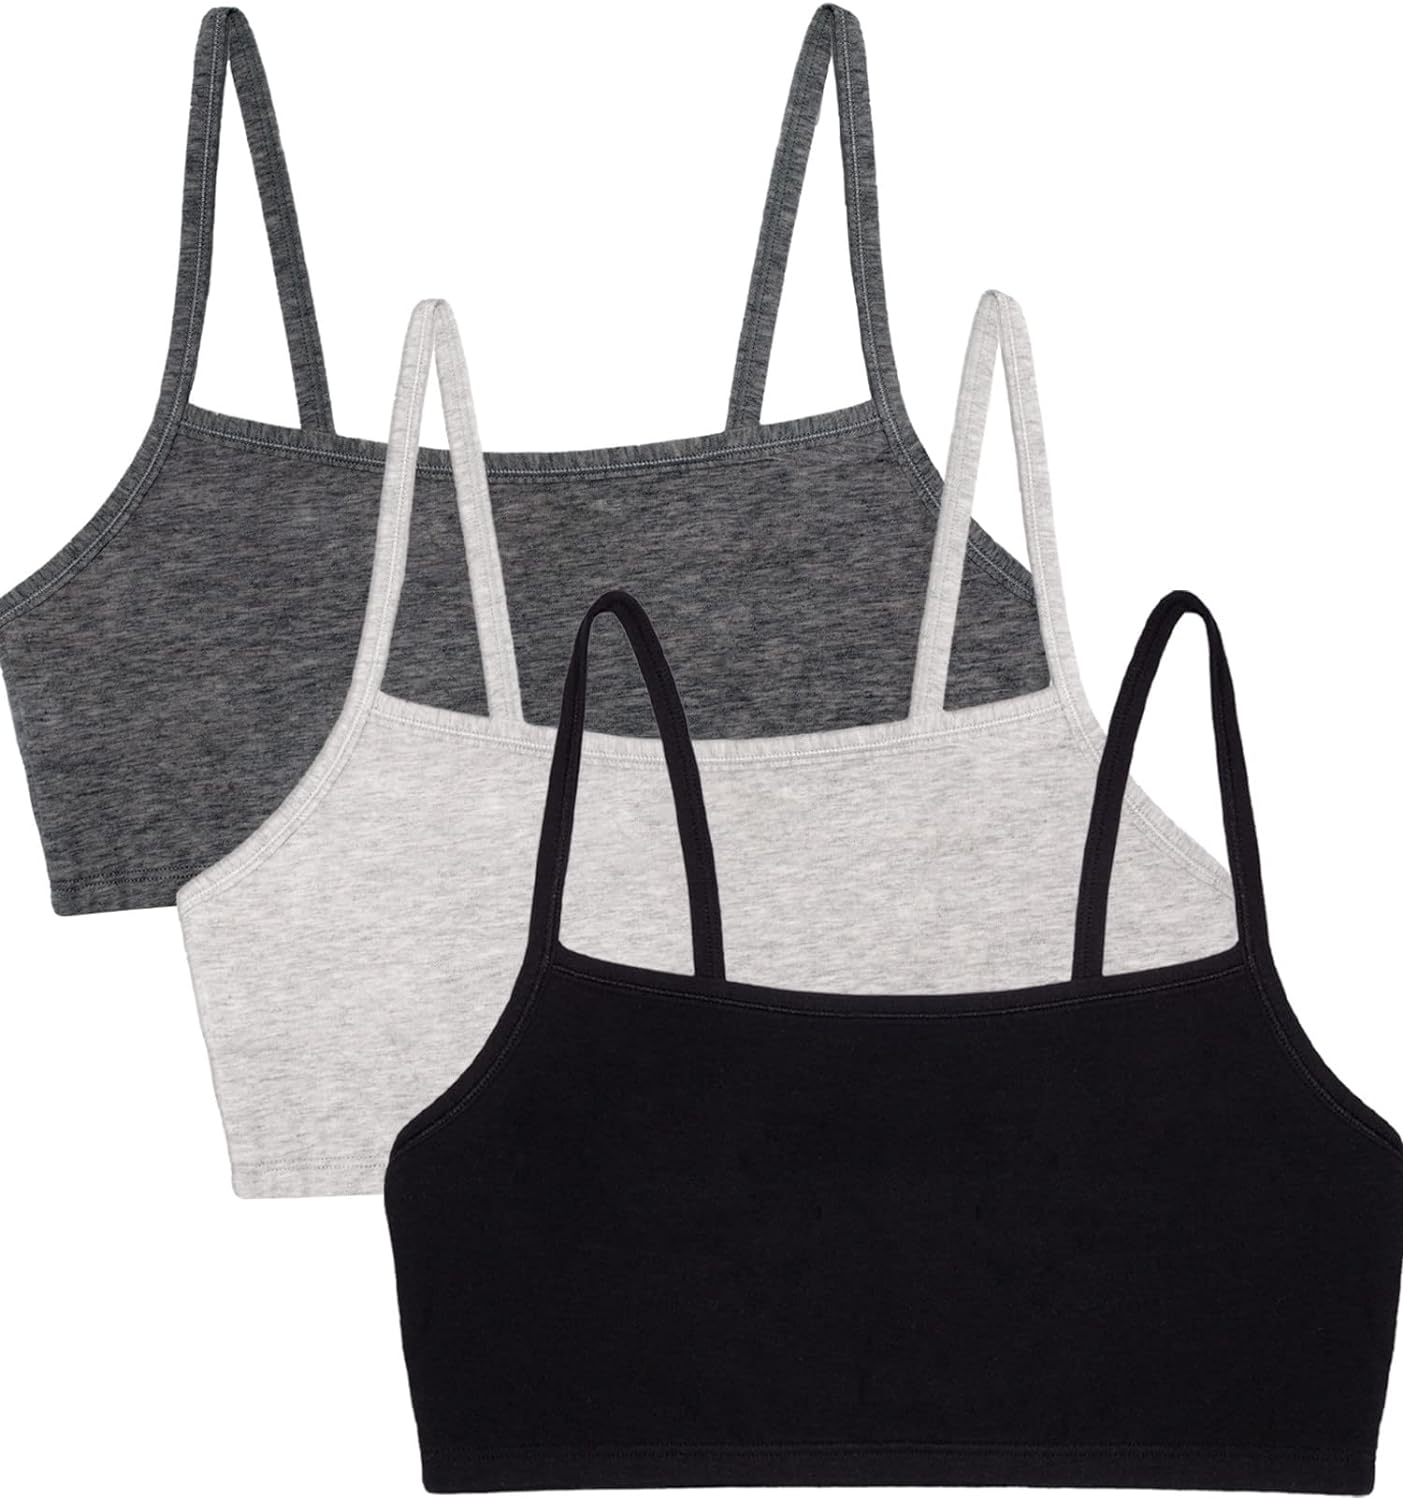 Fruit of The Loom Women's Spaghetti Strap Cotton Pull Over 3 Pack Sports Bra  in Fashion Colors at  Women's Clothing storesettings - ClickEdge